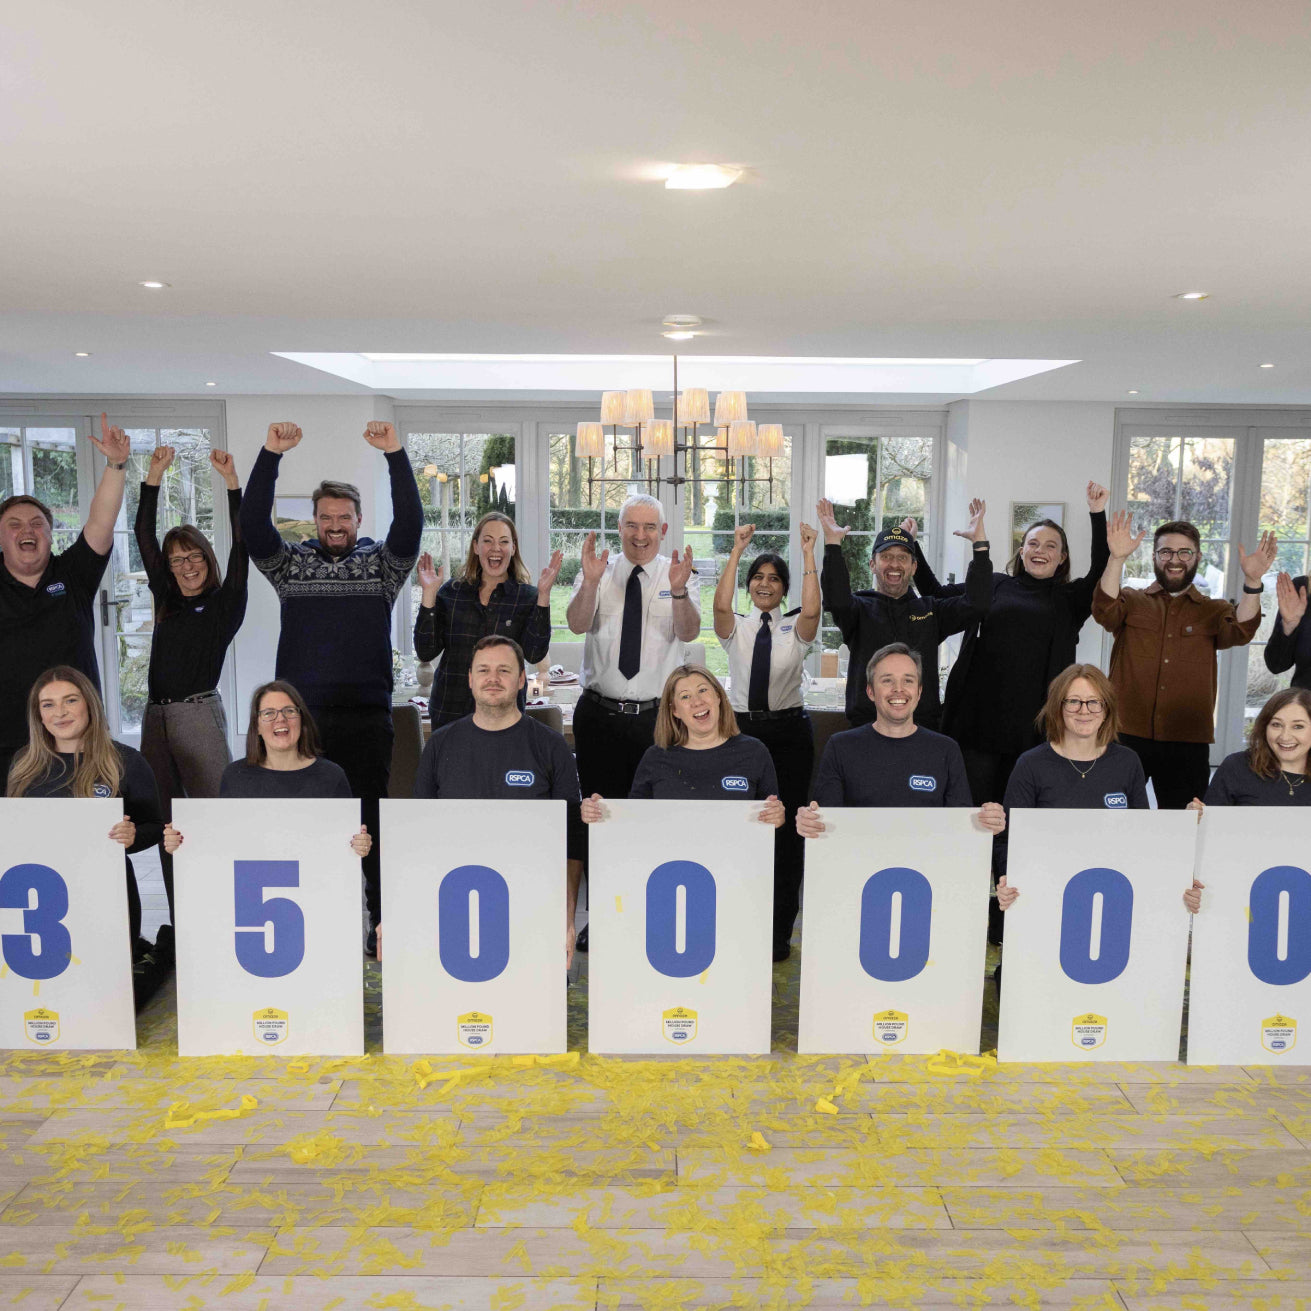 Together We Raised £3,500,000 for the RSPCA